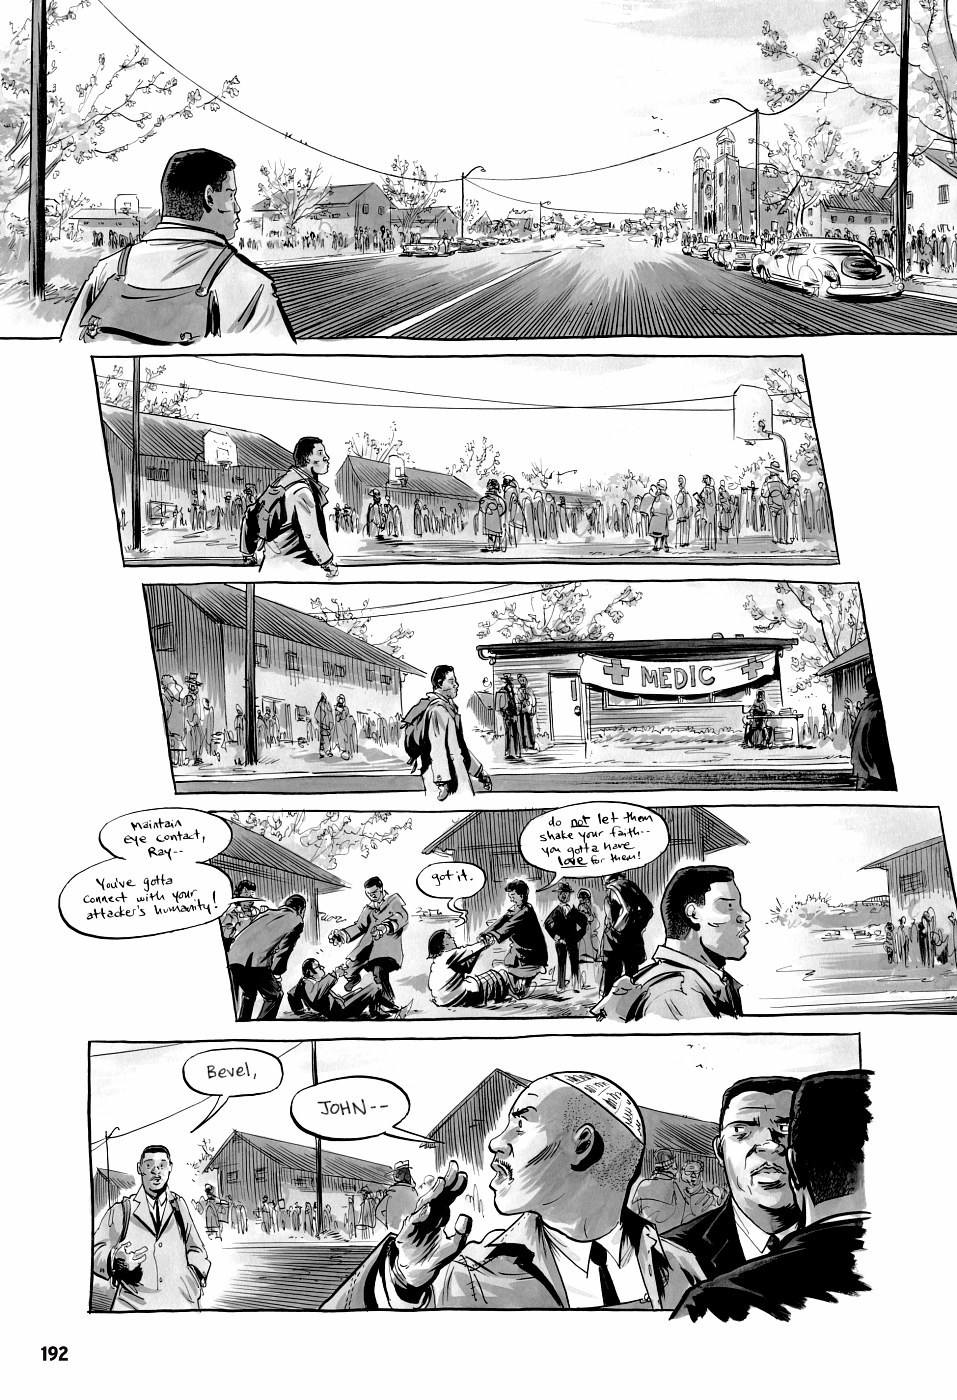 page 192 of march book three graphic novel